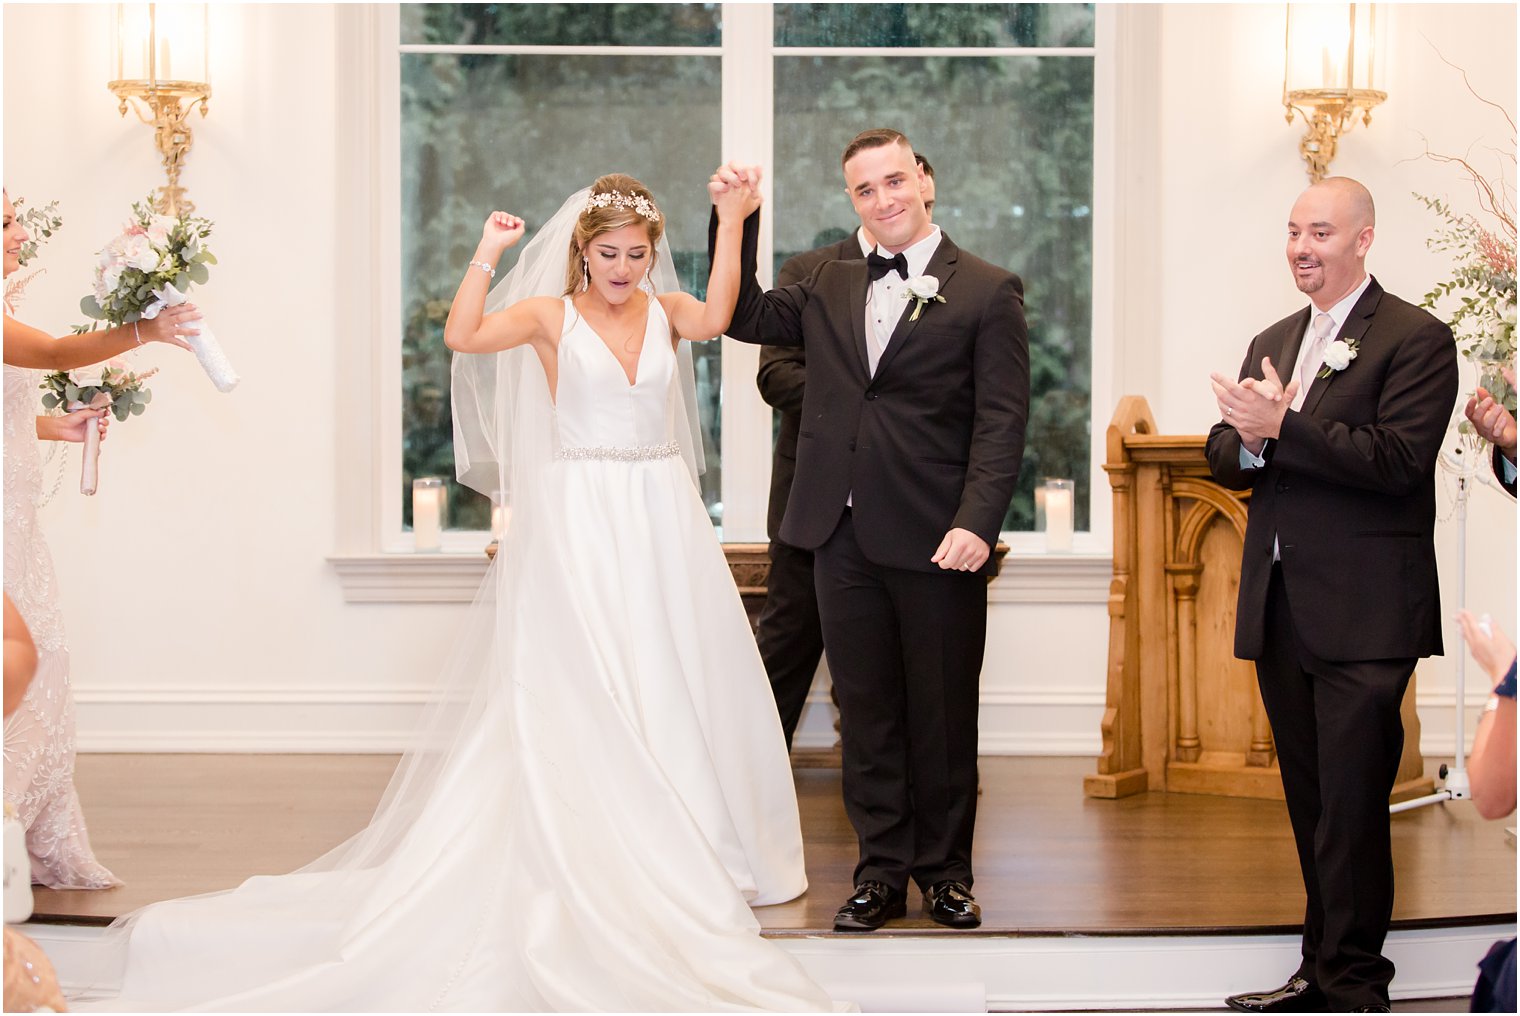 Bride and groom cheering after just having been married